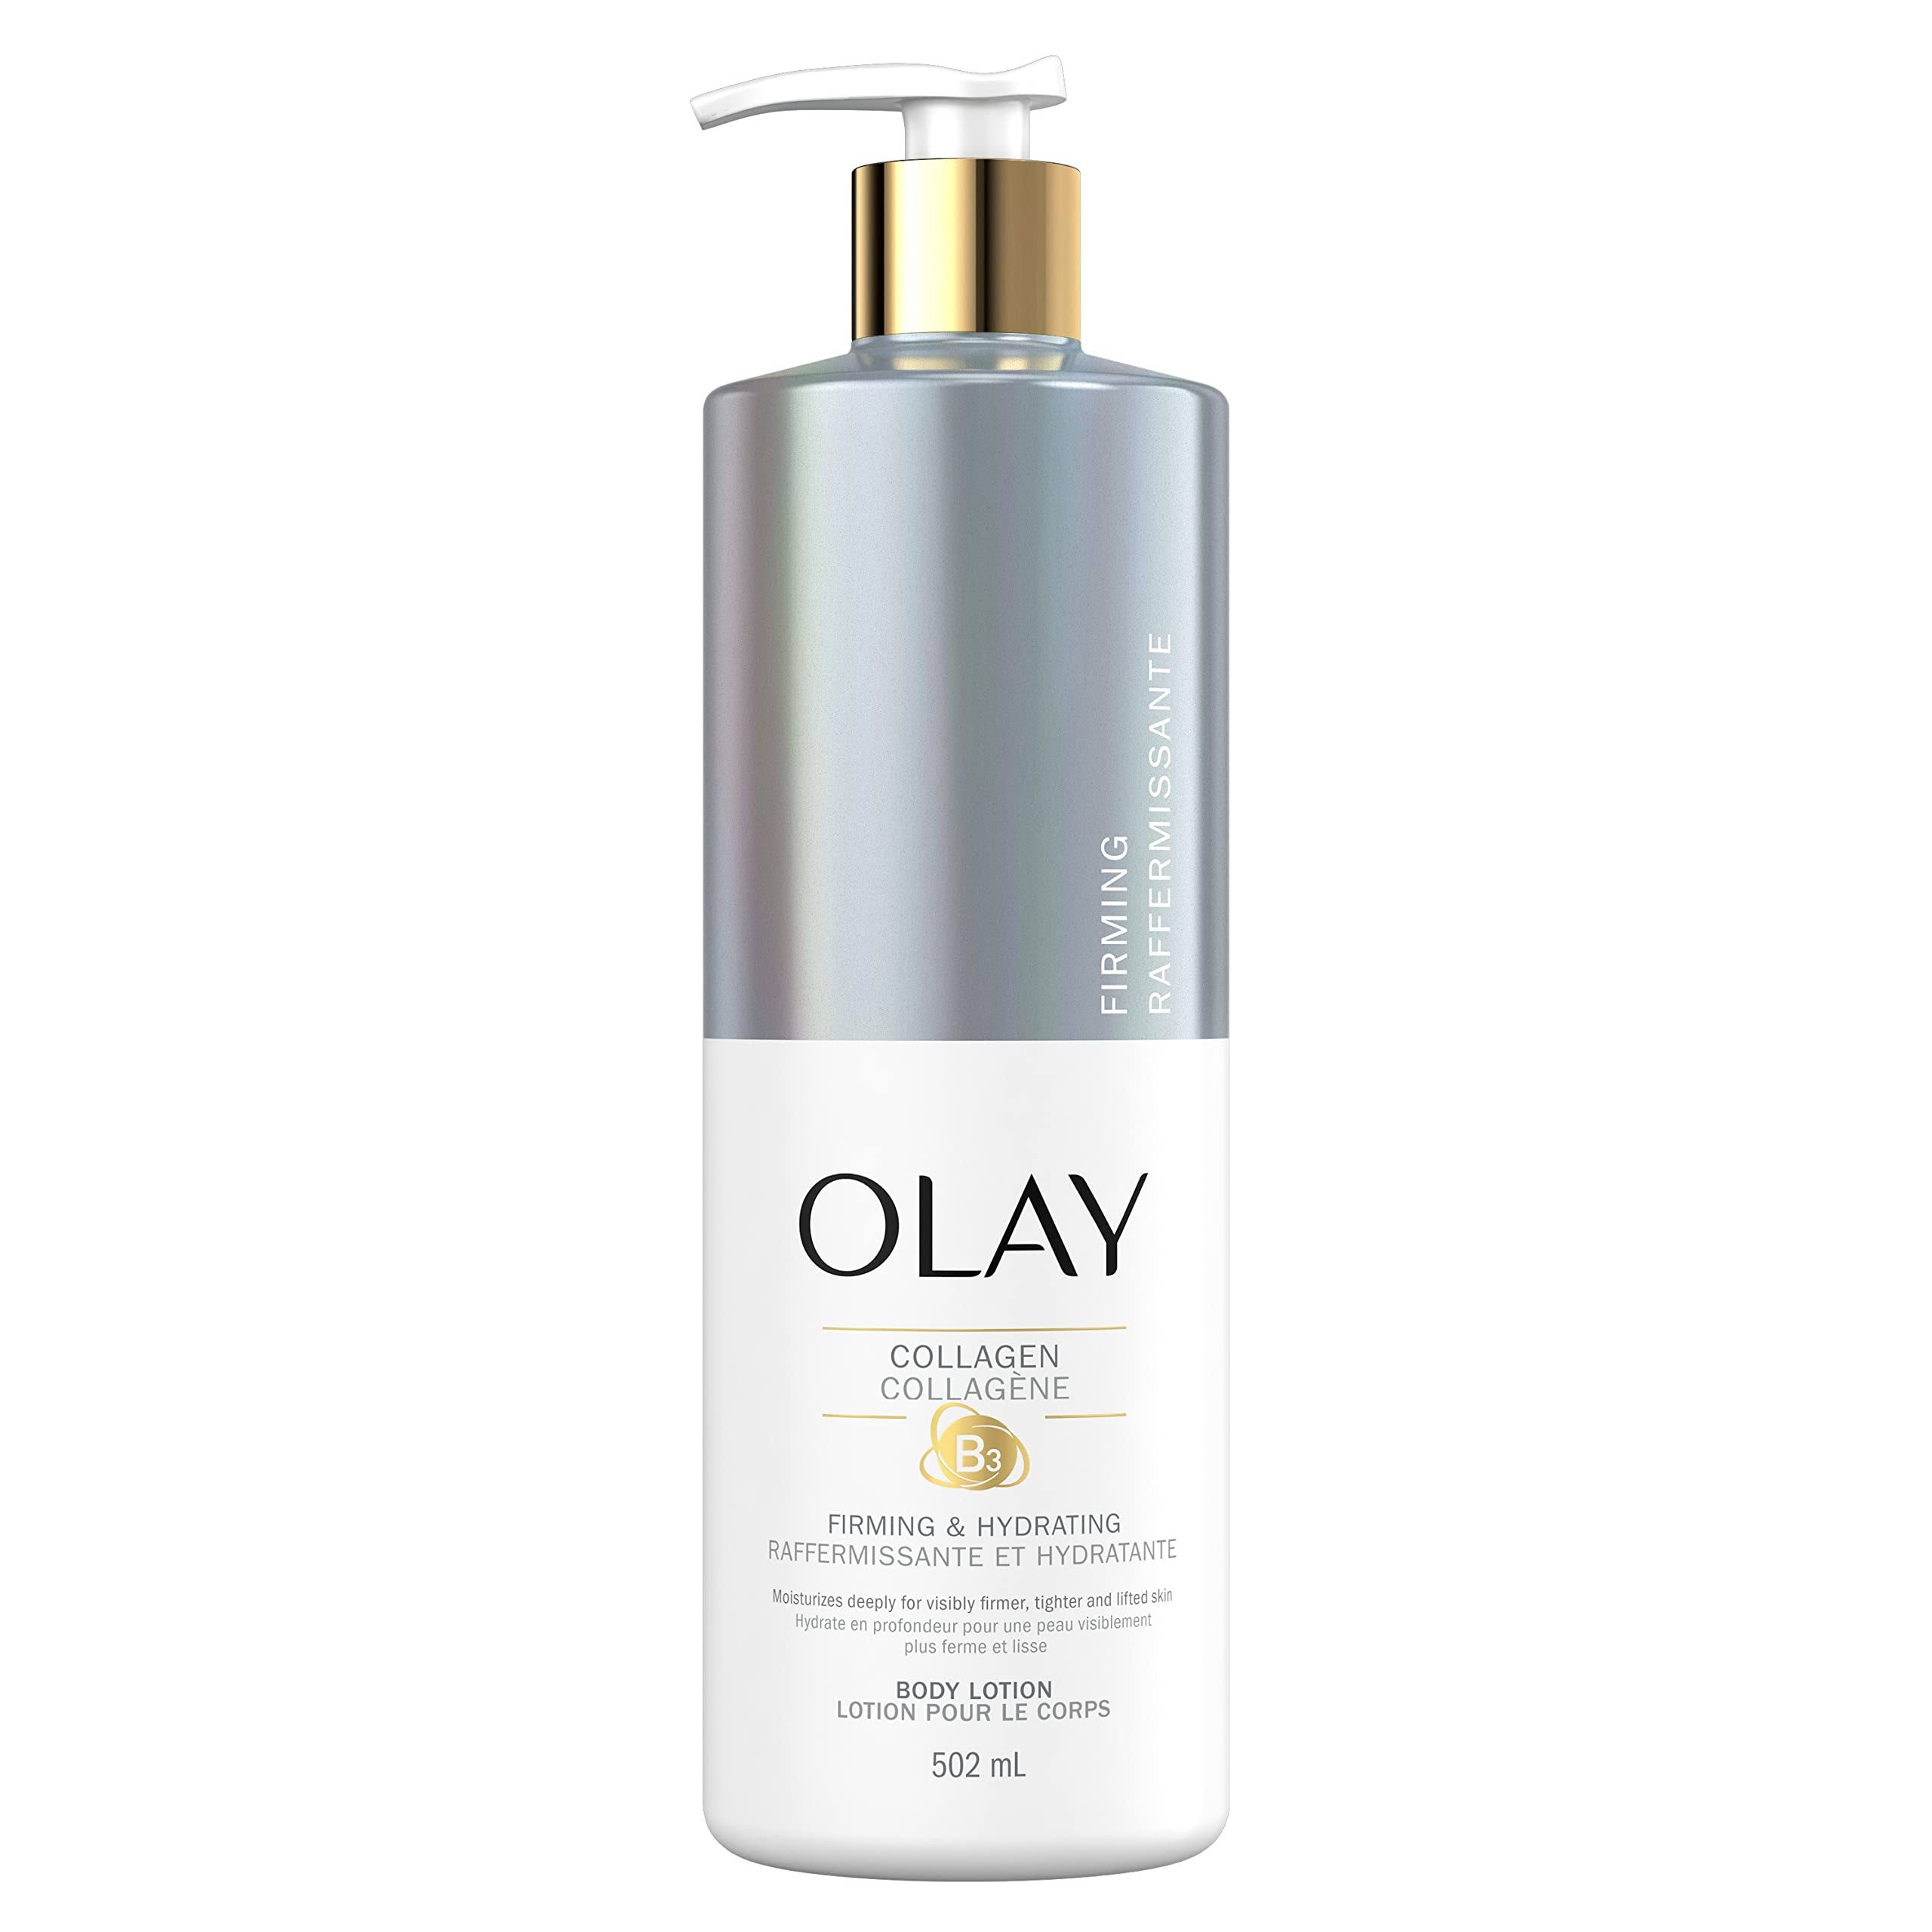 Olay Firming & Hydrating Body Lotion with Collagen 502 mL Pump